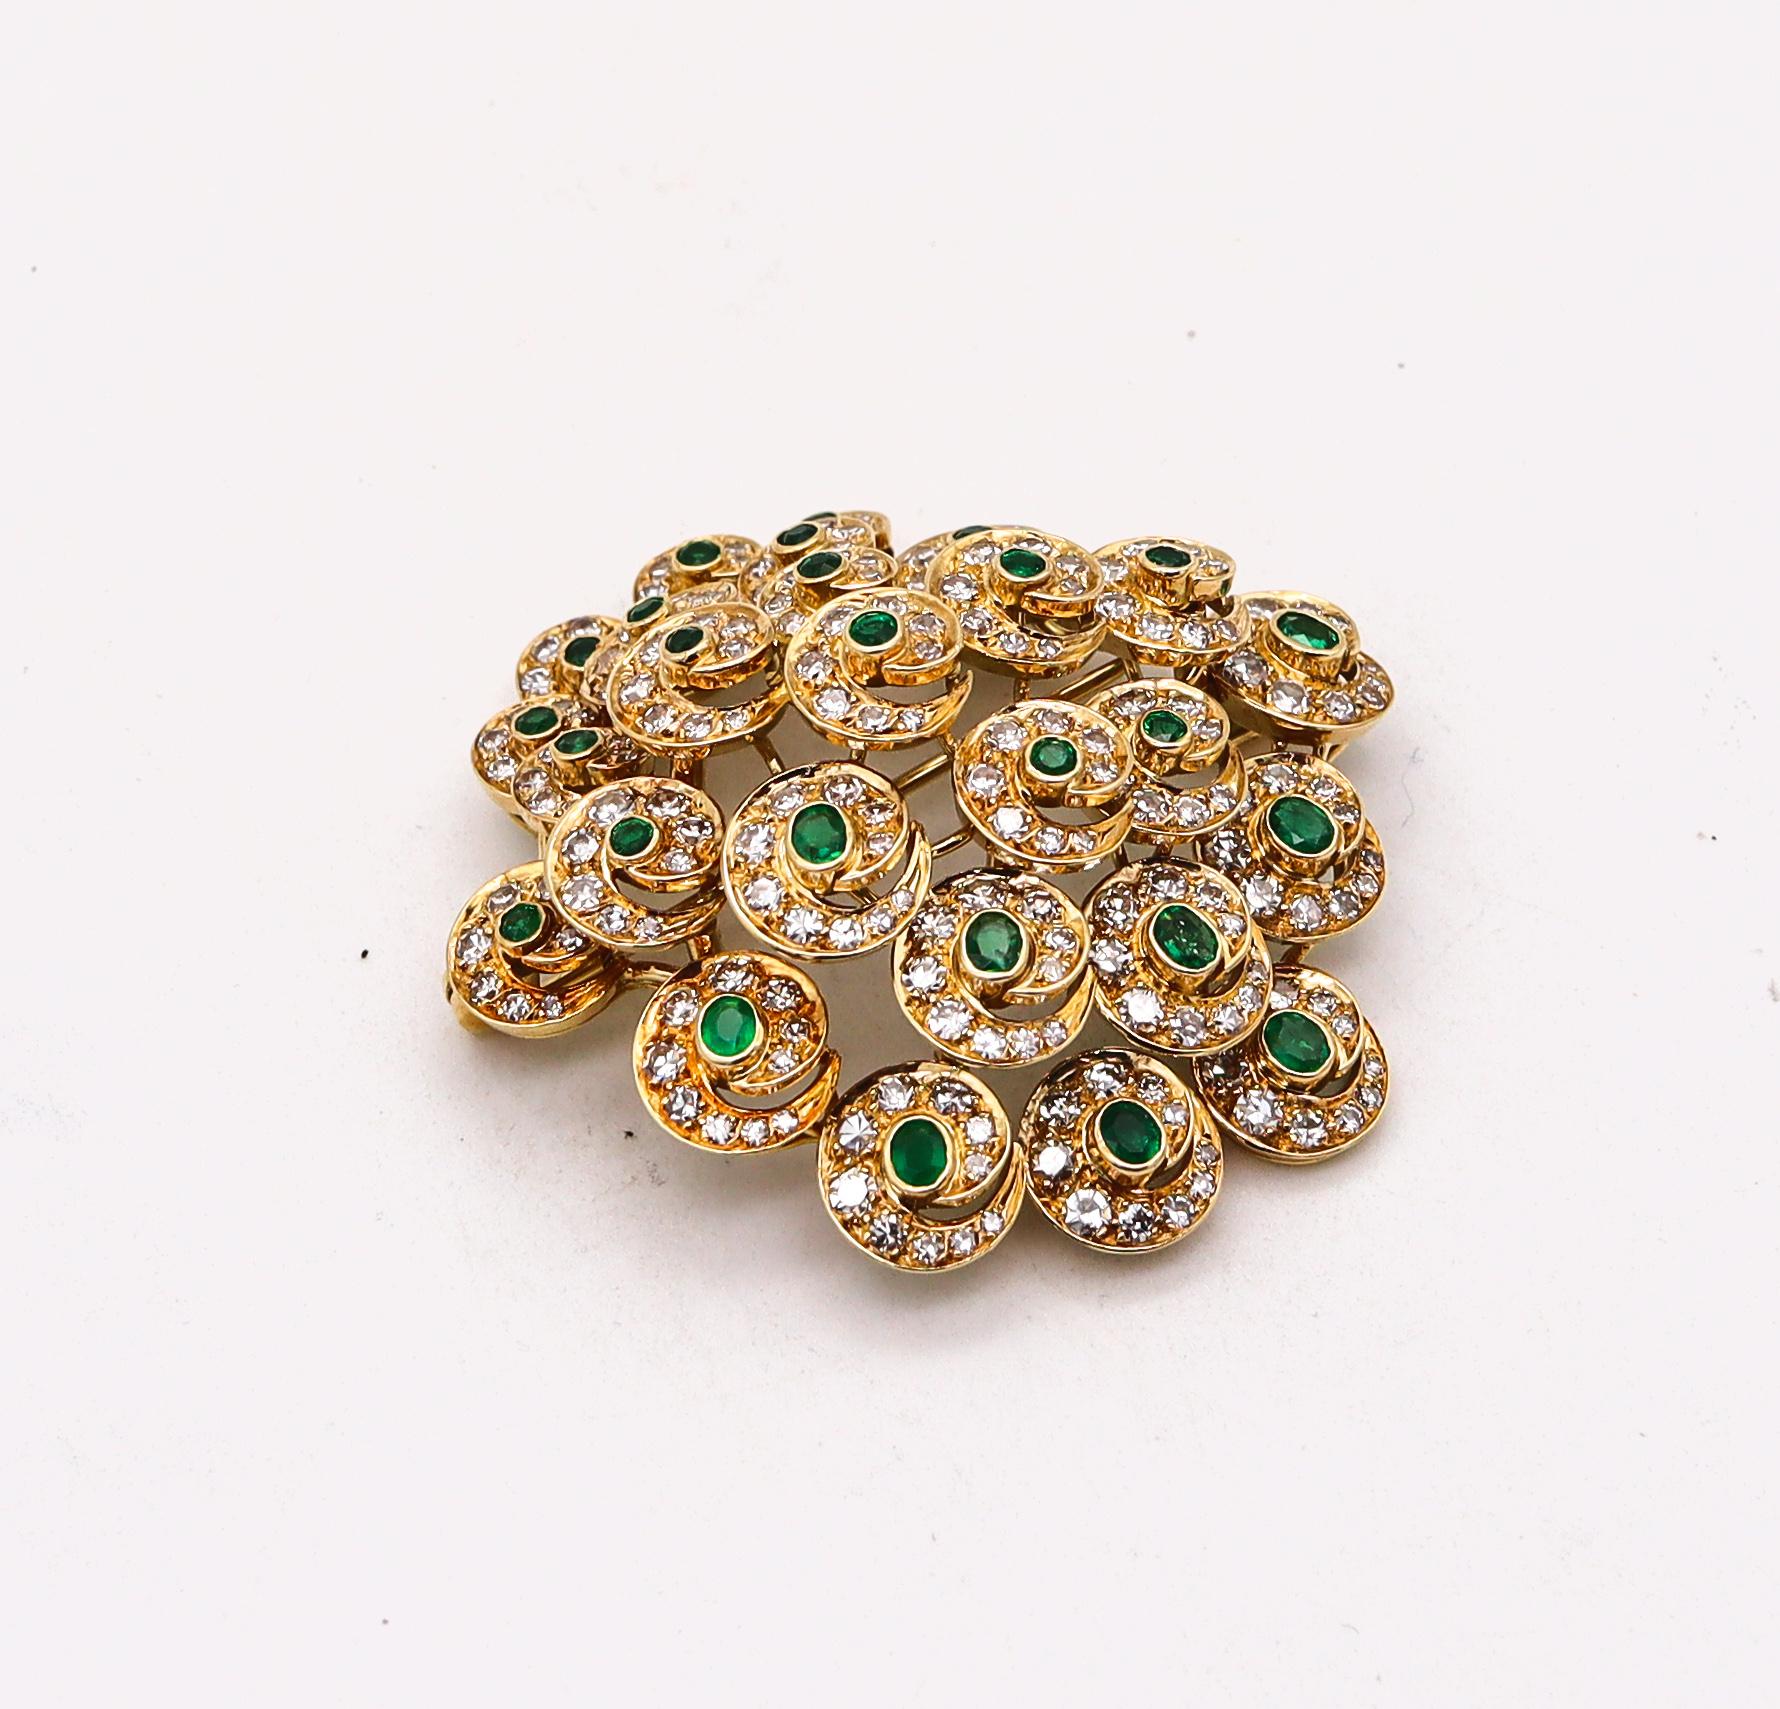 Convertible pendant brooch with natural gemstones.

An Italian colorful piece, beautifully crafted in a three dimensional shape in solid yellow gold of 18 karats with high polished finish. This convertible piece is fitted with a hinged horizontal